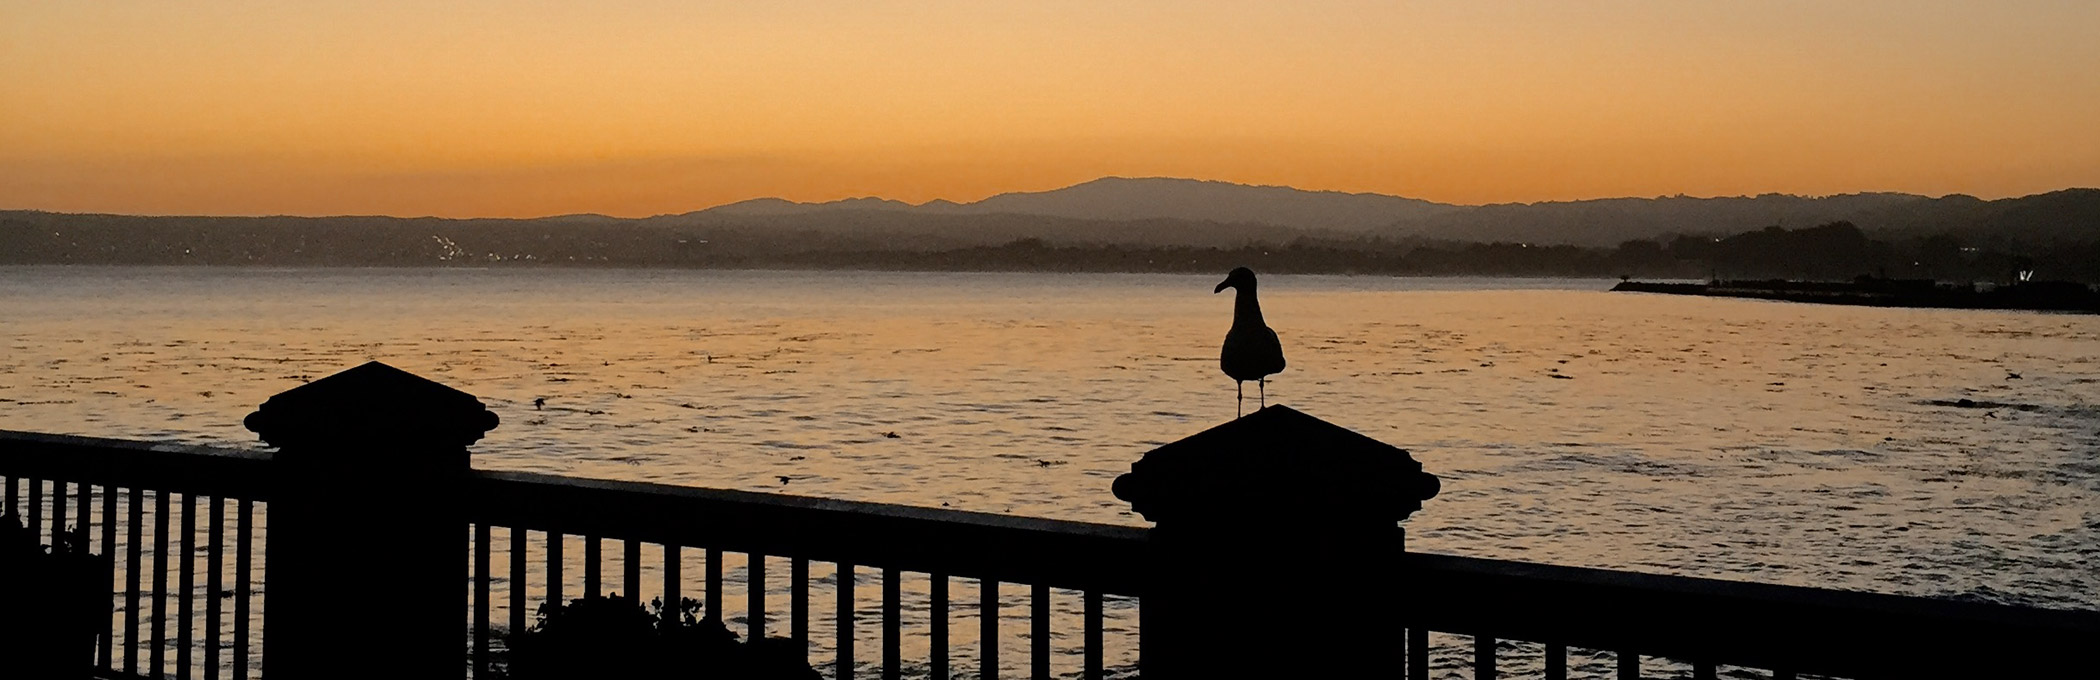 Sunset view of ocean with bird perched on the fence